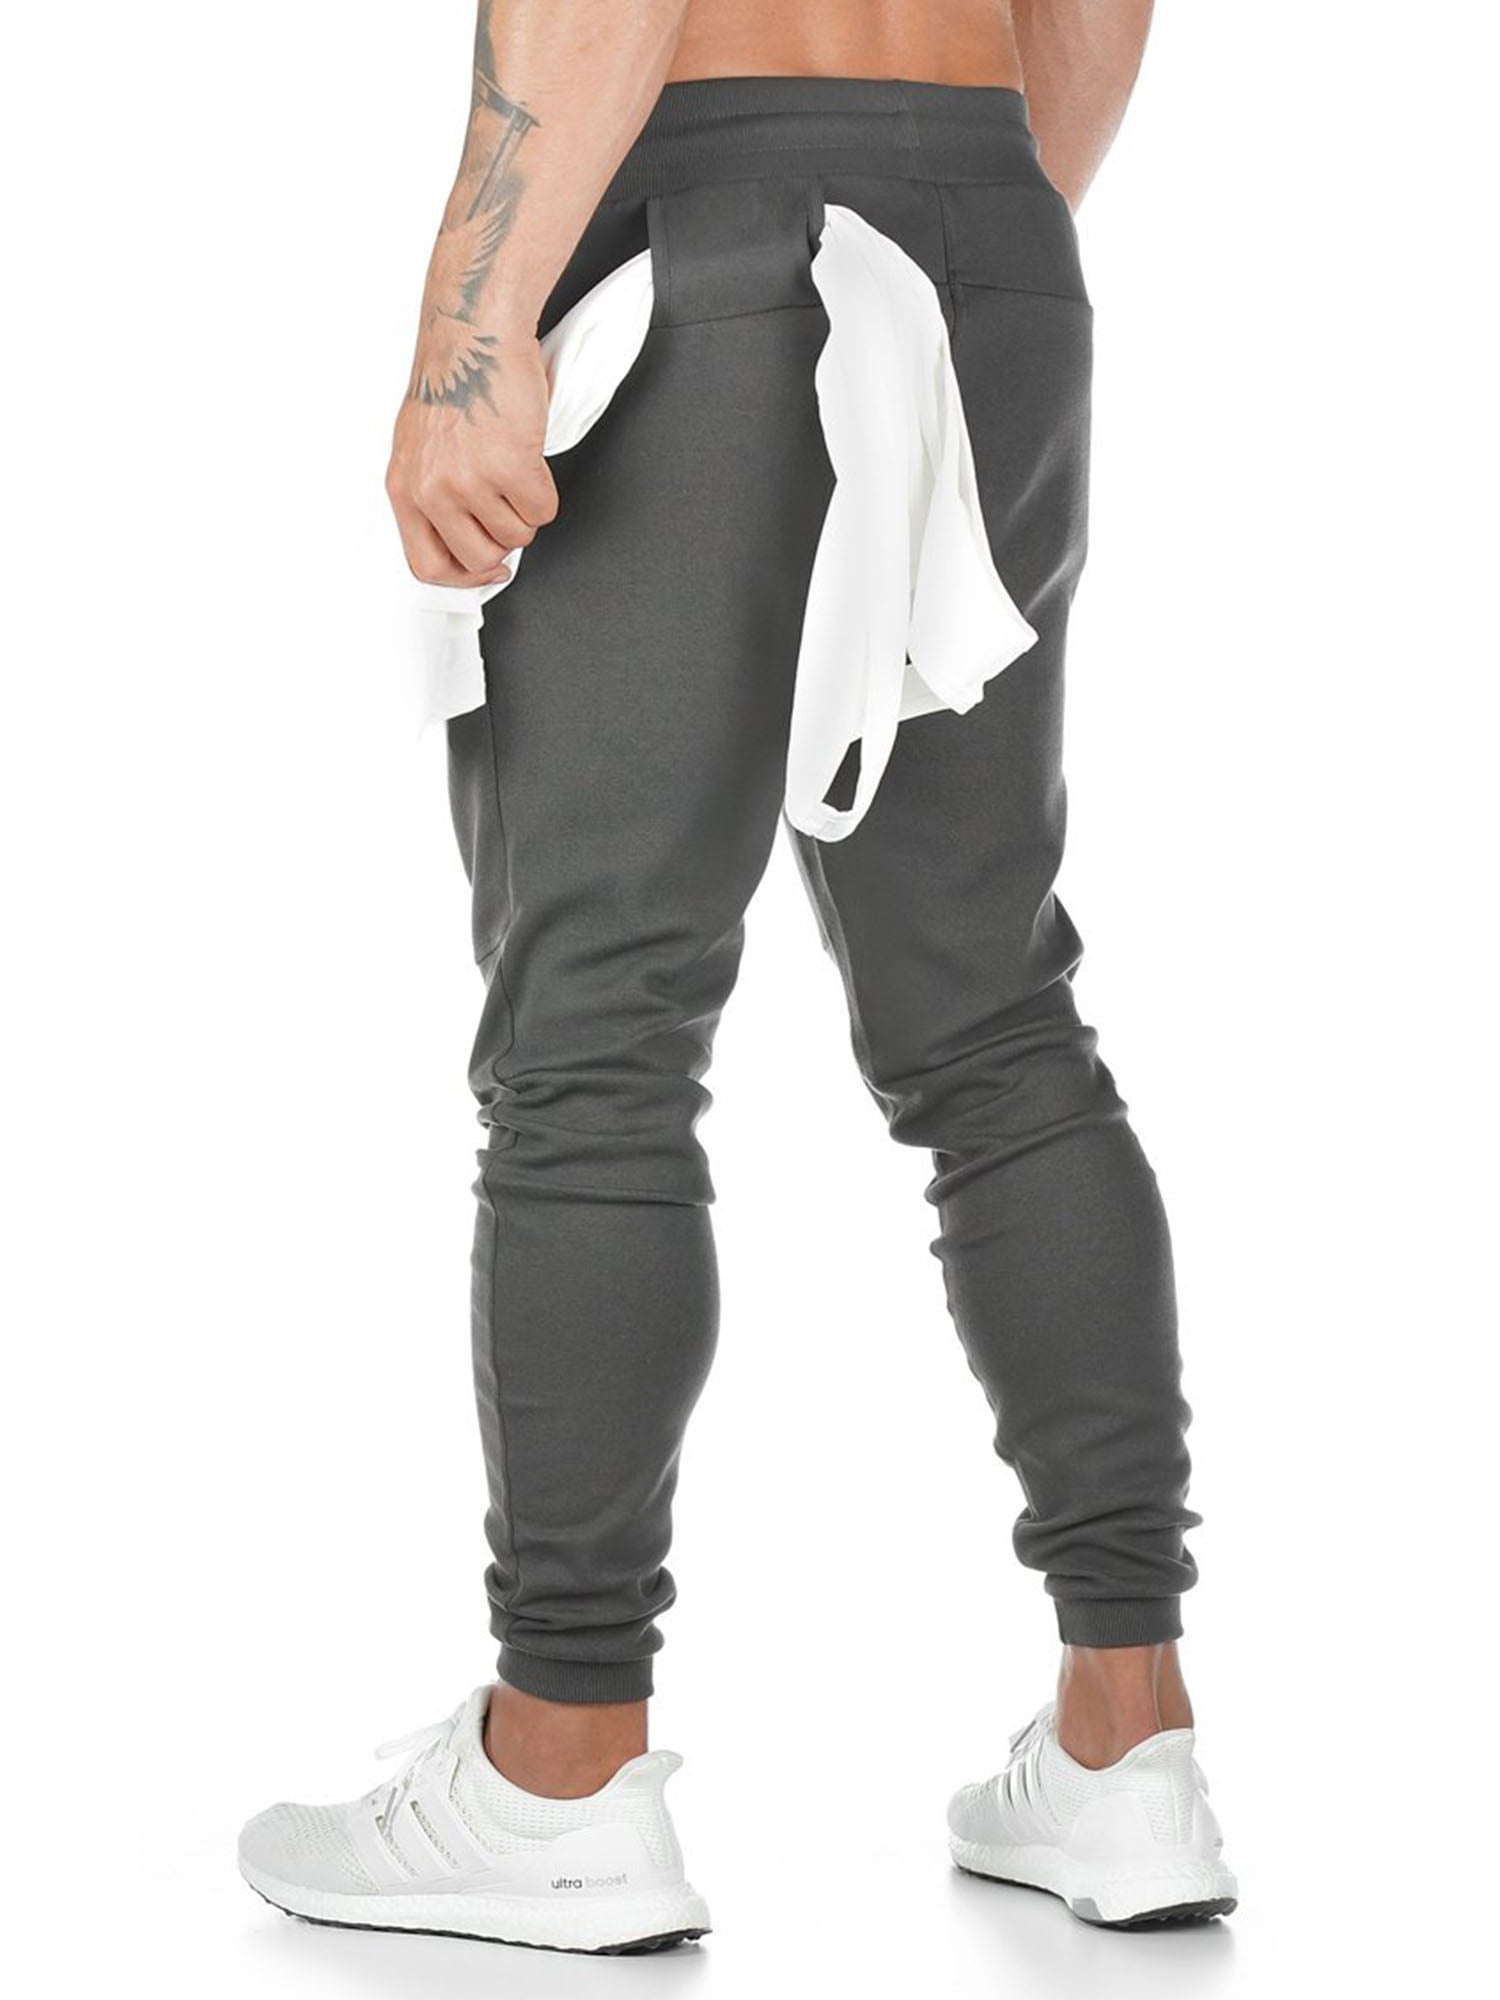 Details about   Mens Activewear Jogging Pants Workout Running Sweatpants with Zip Pockets Solid 